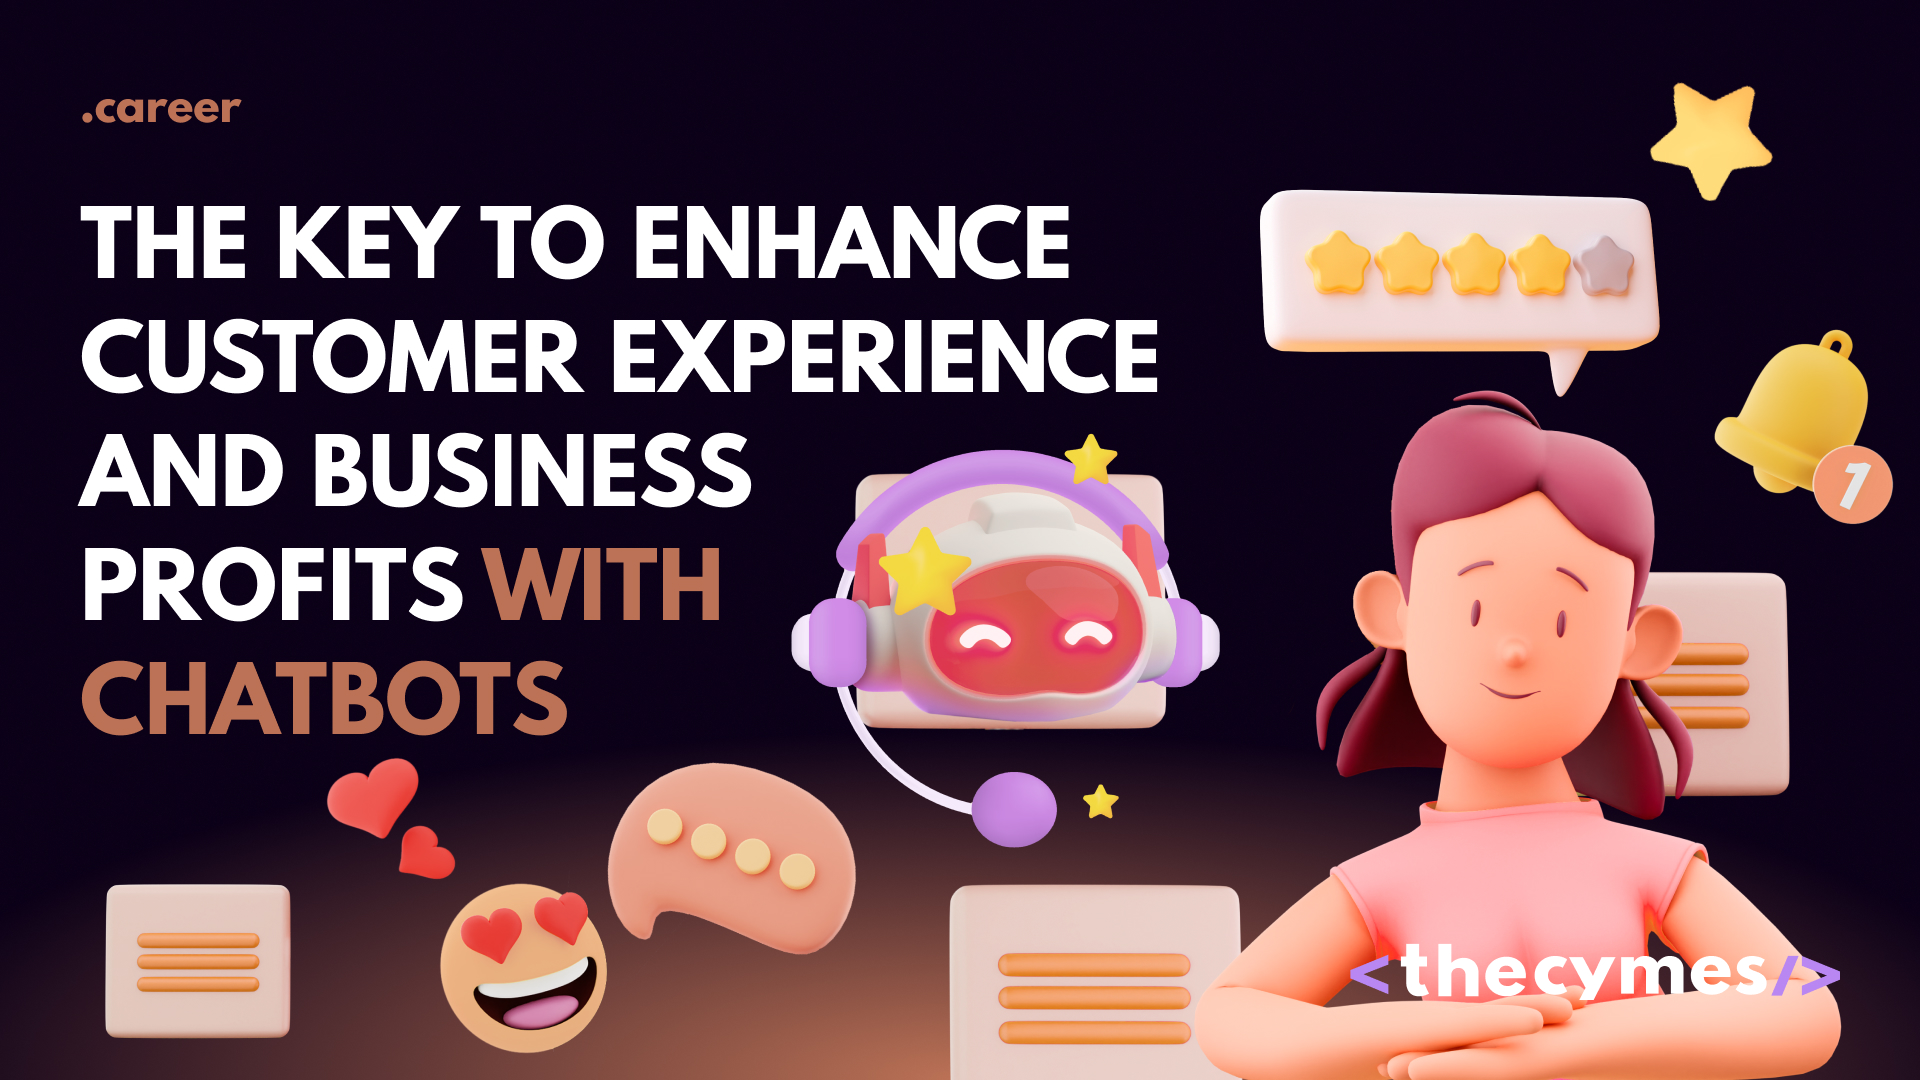 The Key to Enhance Customer Experience and Business Profits with Chatbots cover